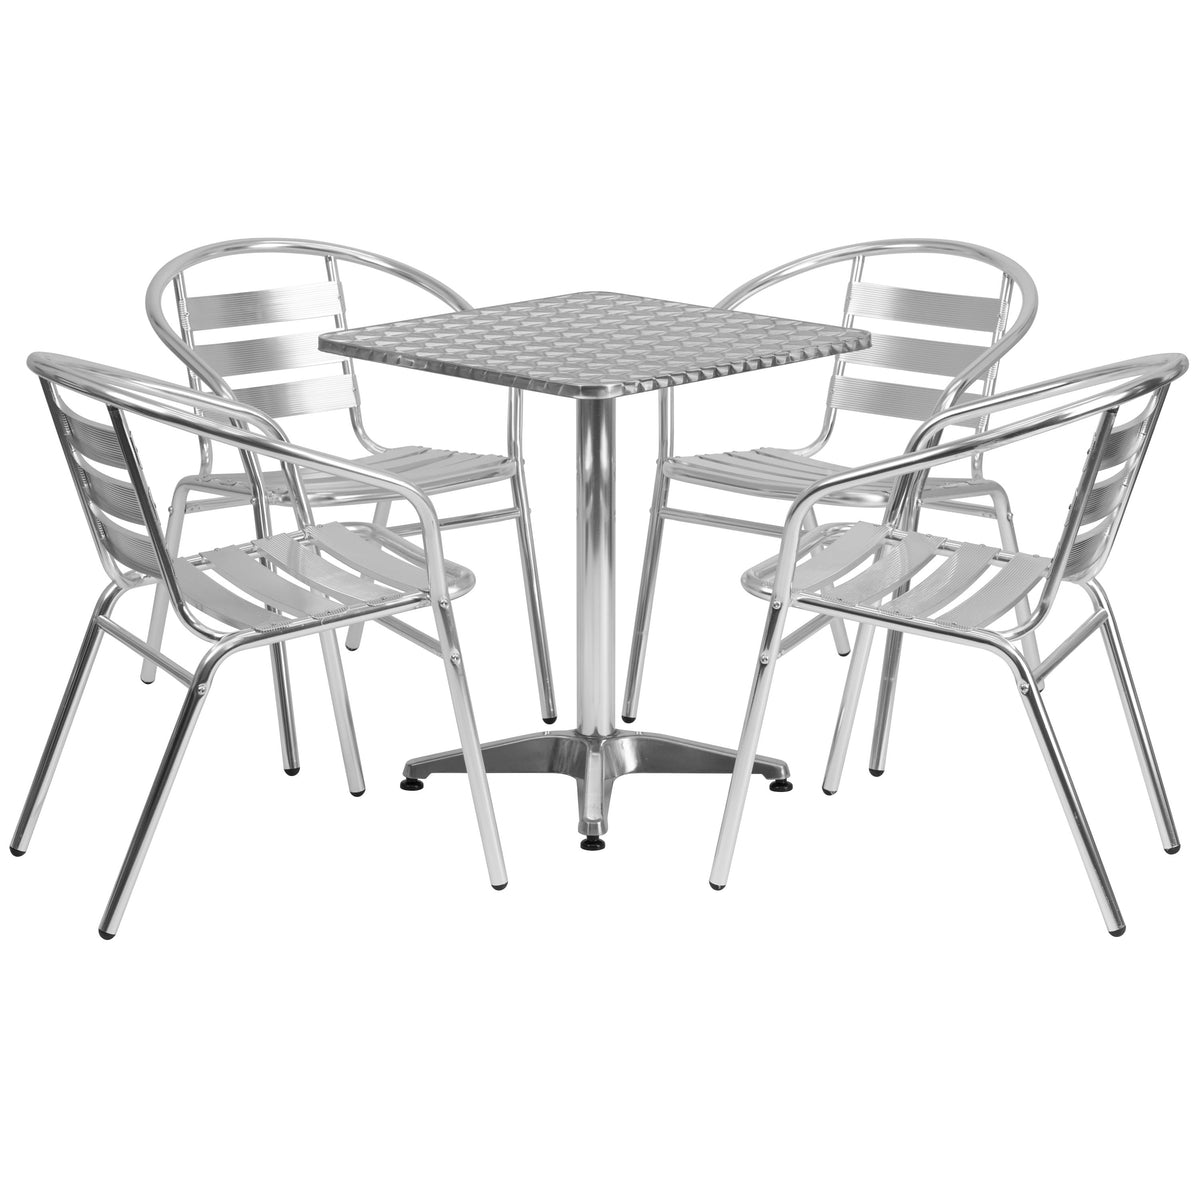 23.5inch Square Aluminum Indoor-Outdoor Table Set with 4 Slat Back Chairs